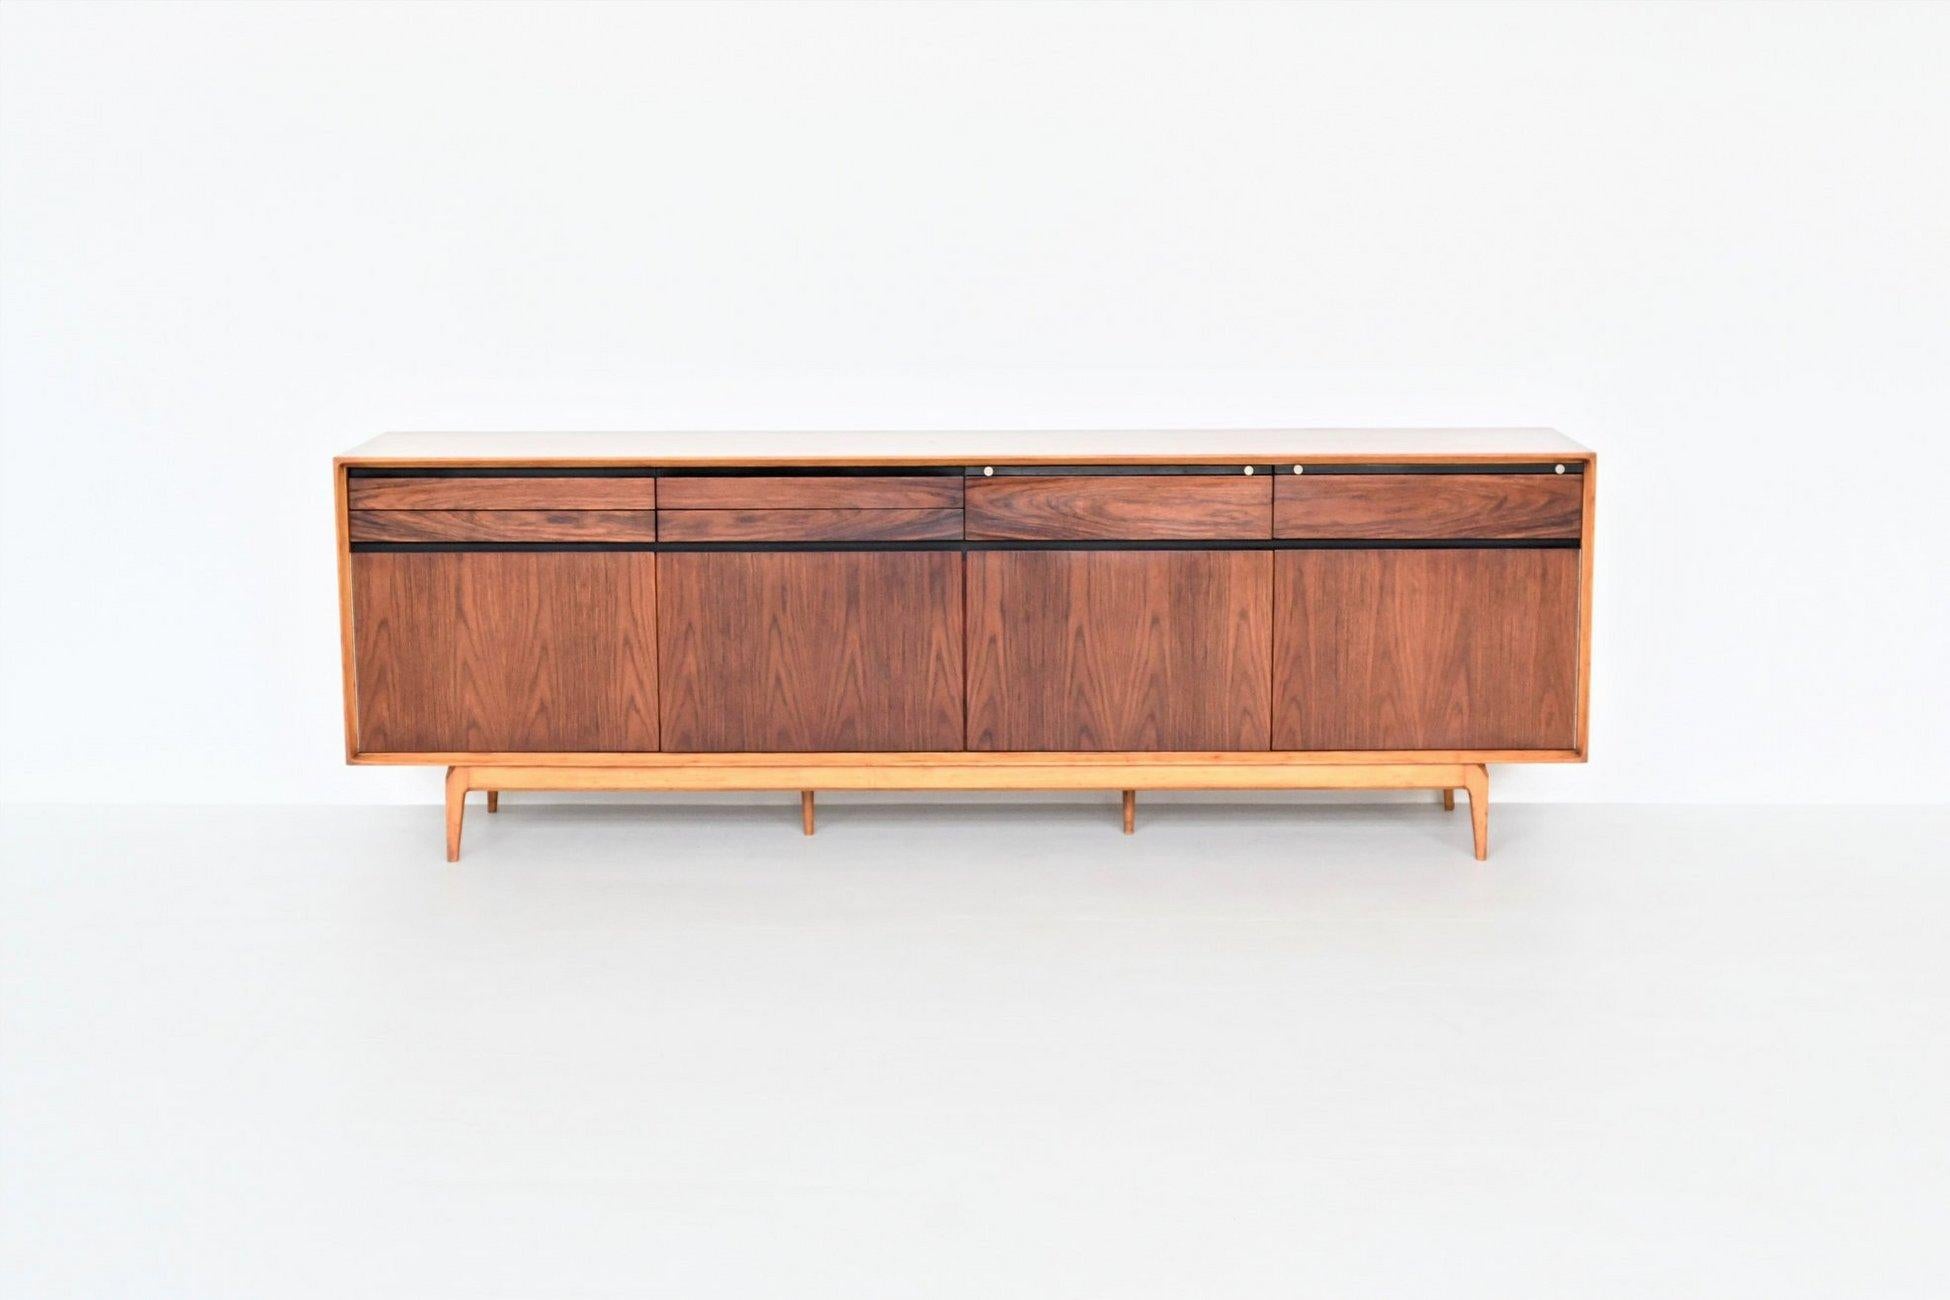 Beautiful and very rare sideboard model Madison designed by Fred Sandra and manufactured by De Coene, Belgium 1960. This well-crafted and heavy sideboard is produced in rosewood and walnut. It has a very nice and warm grain to the rosewood veneered